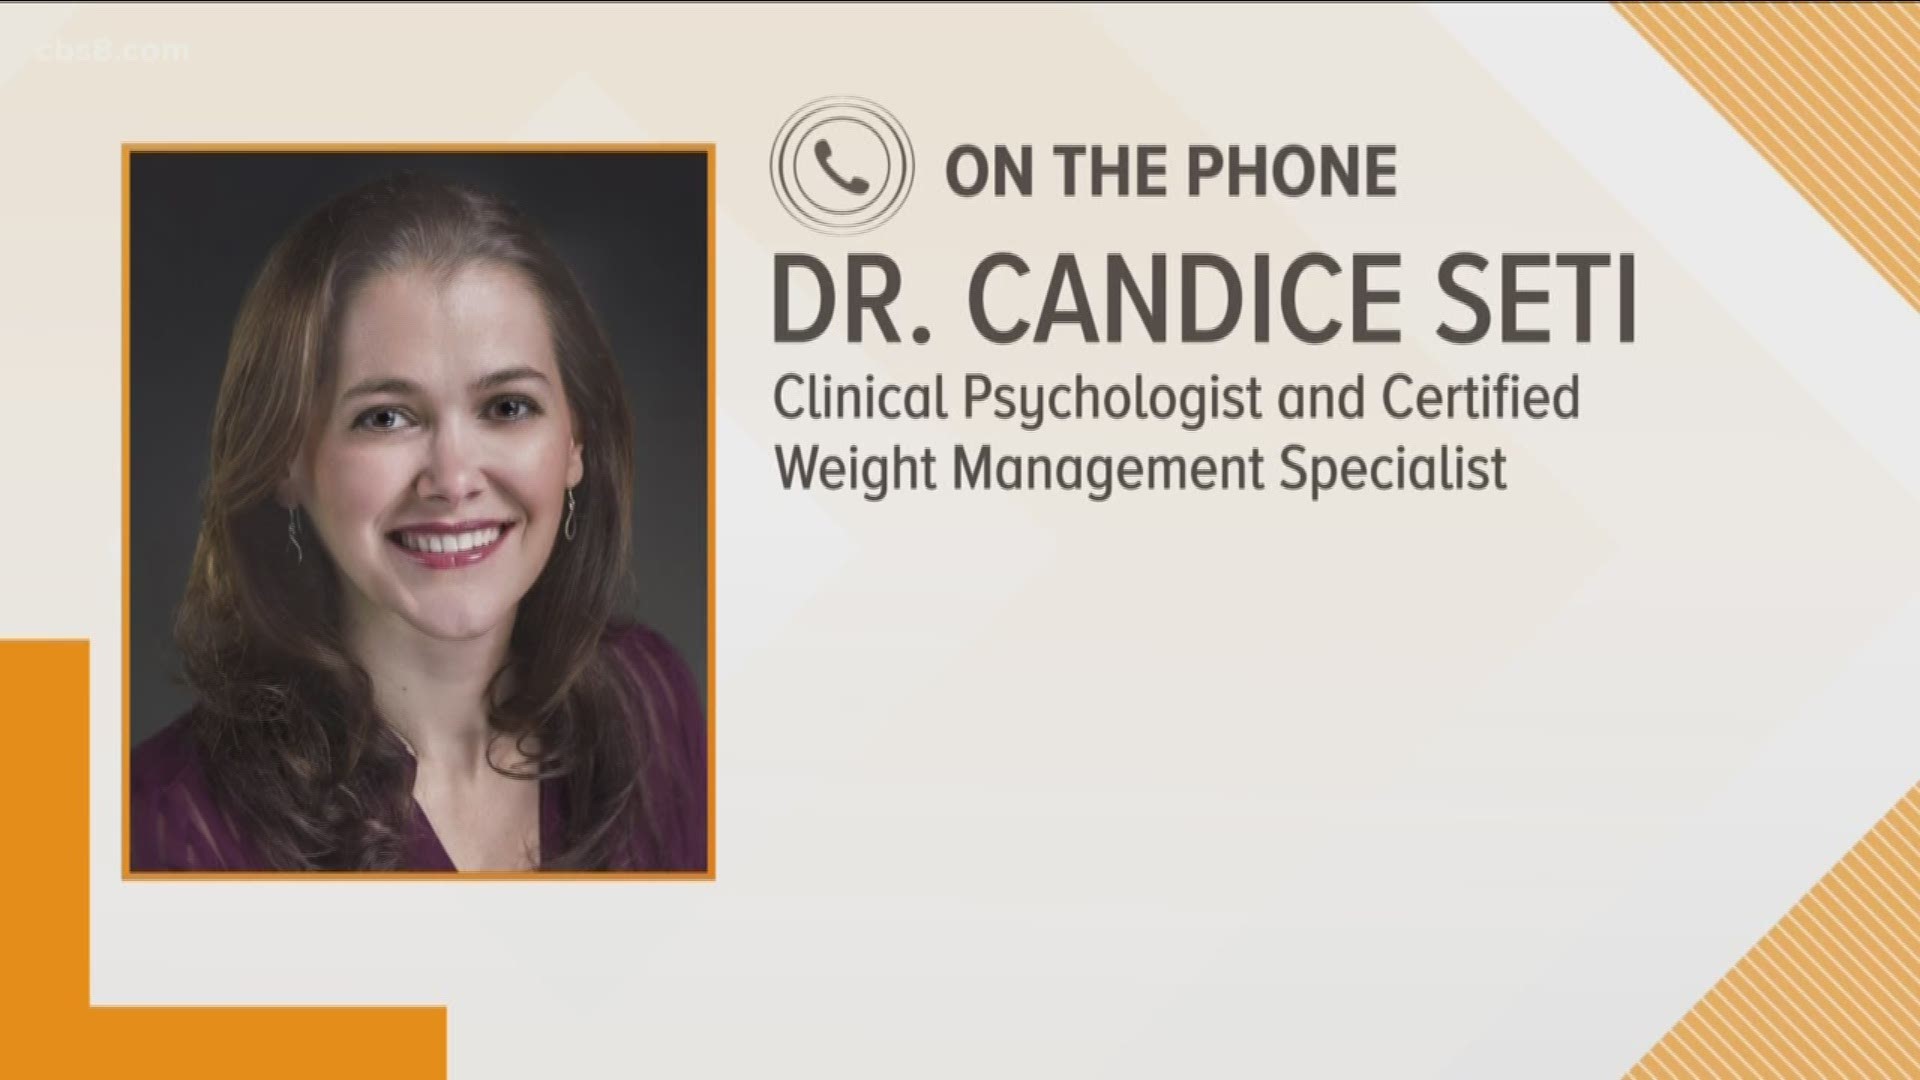 Dr. Candice Seti joined Morning Extra to talk about the psychology of overeating and the possible health issues that may arise.